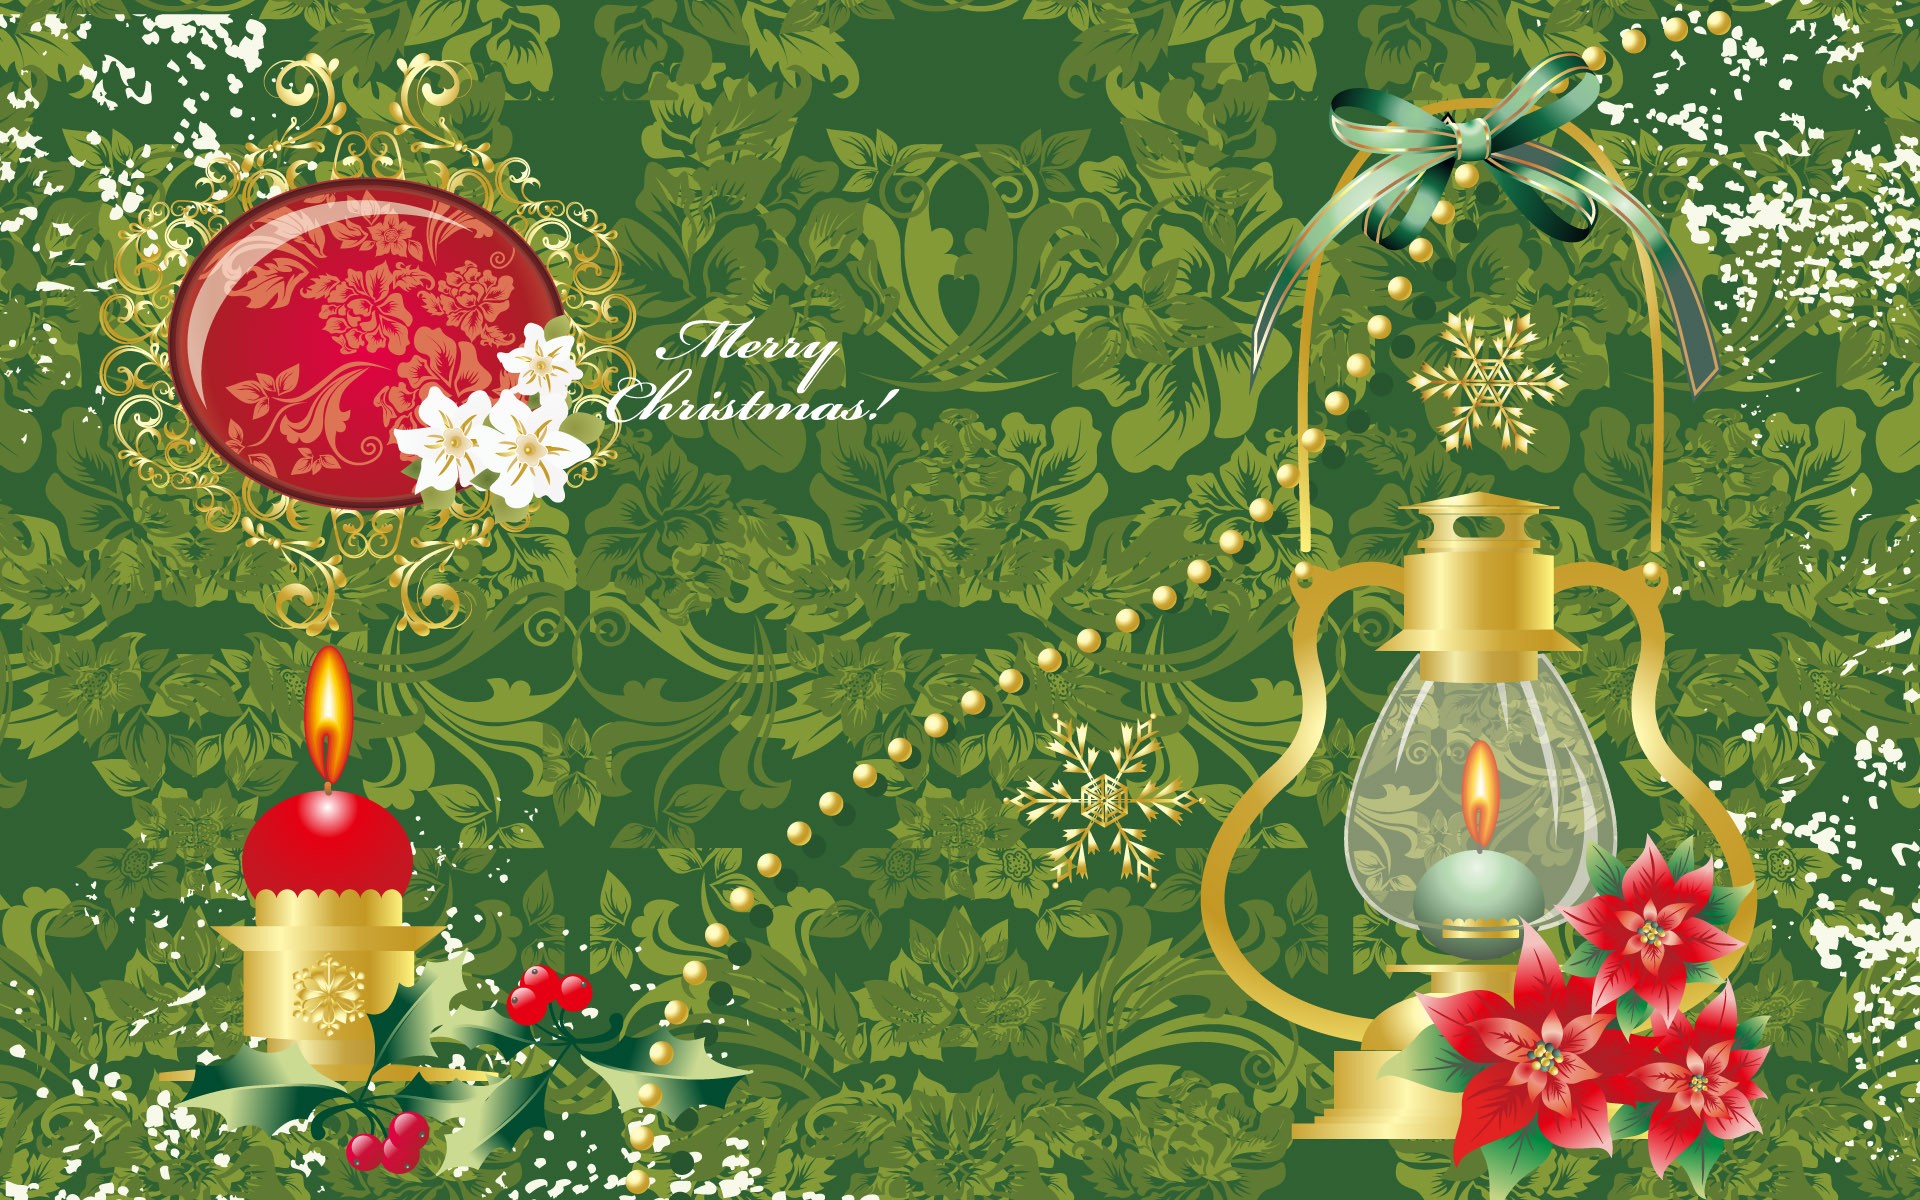 Exquisite Christmas Theme HD Wallpapers #23 - 1920x1200